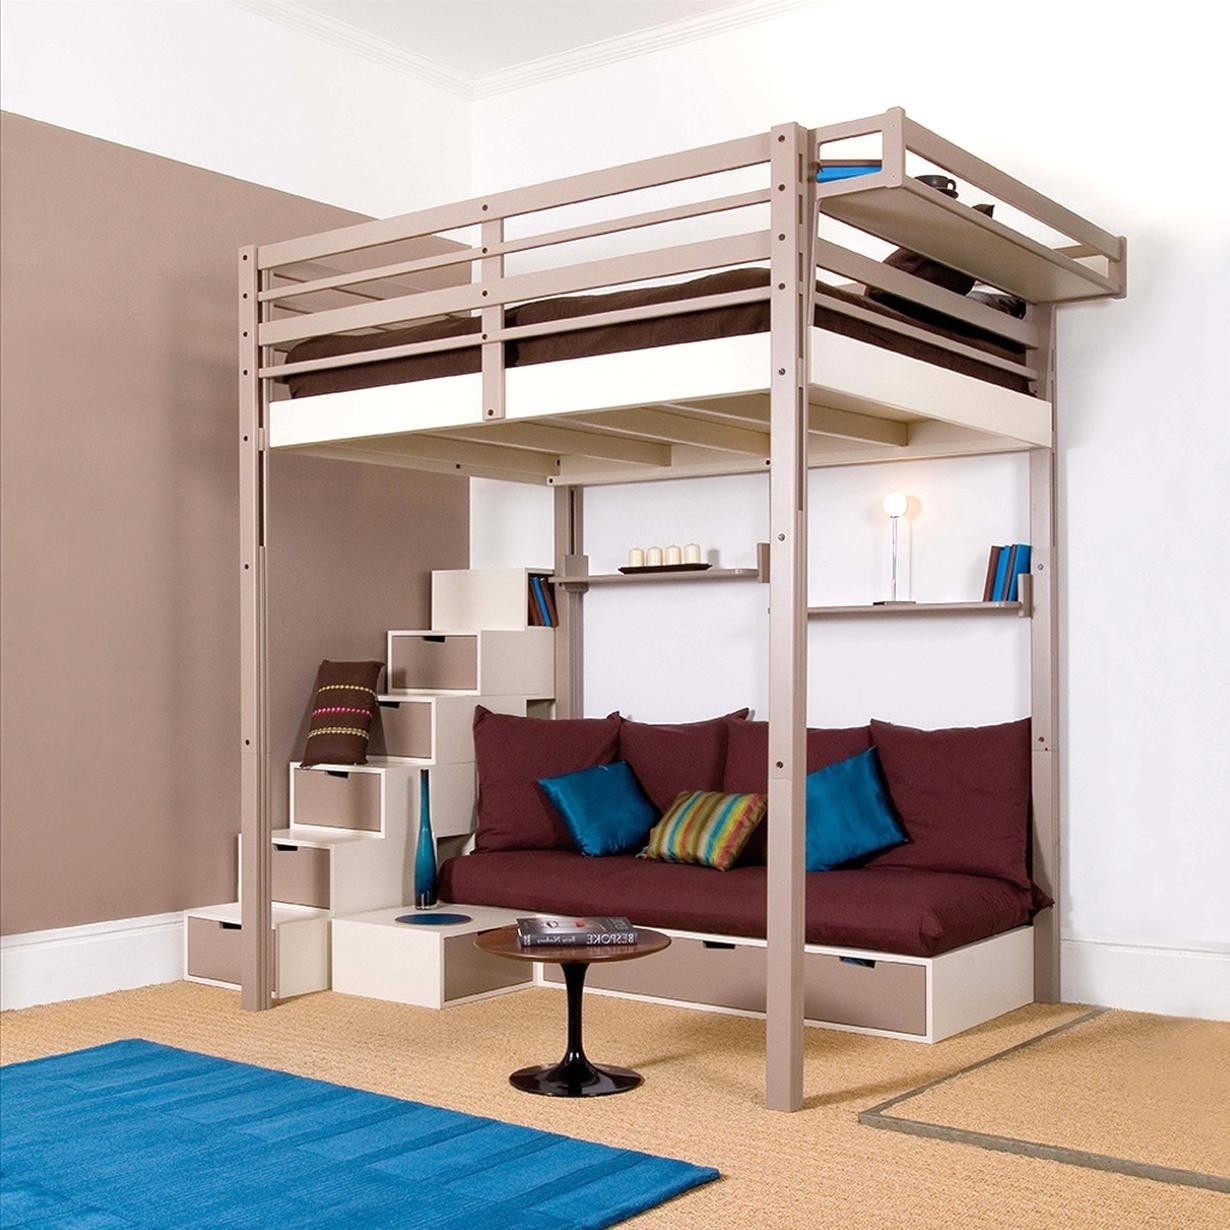 Full Size Loft Bed With Stairs Visualhunt, Bunk Bed Plans With Stairs